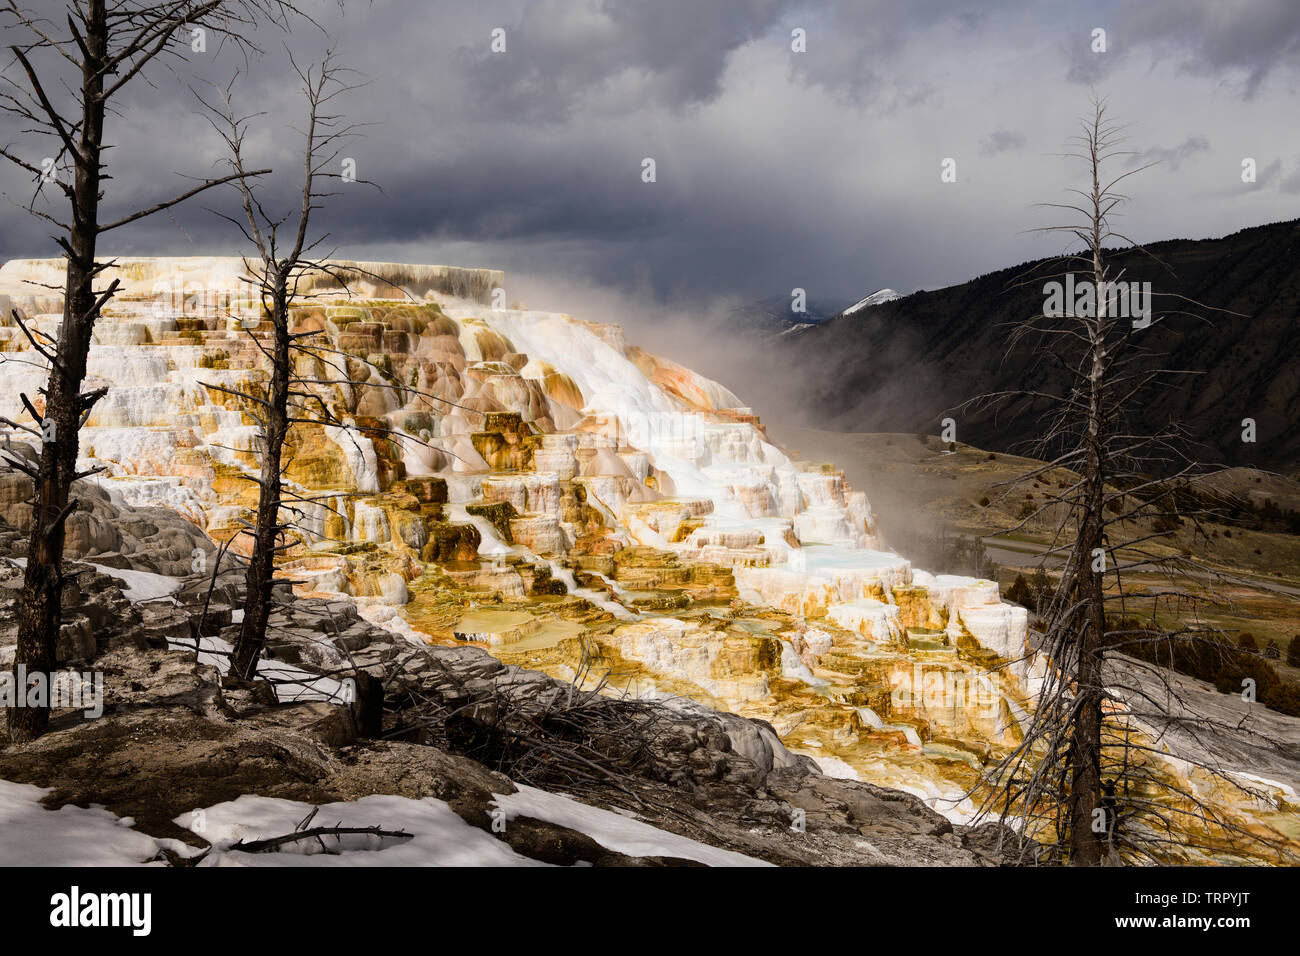 The Mammoth Hot Springs terrace formation near the headquarters of Yellowstone National Park in Wyoming, North America. Stock Photo